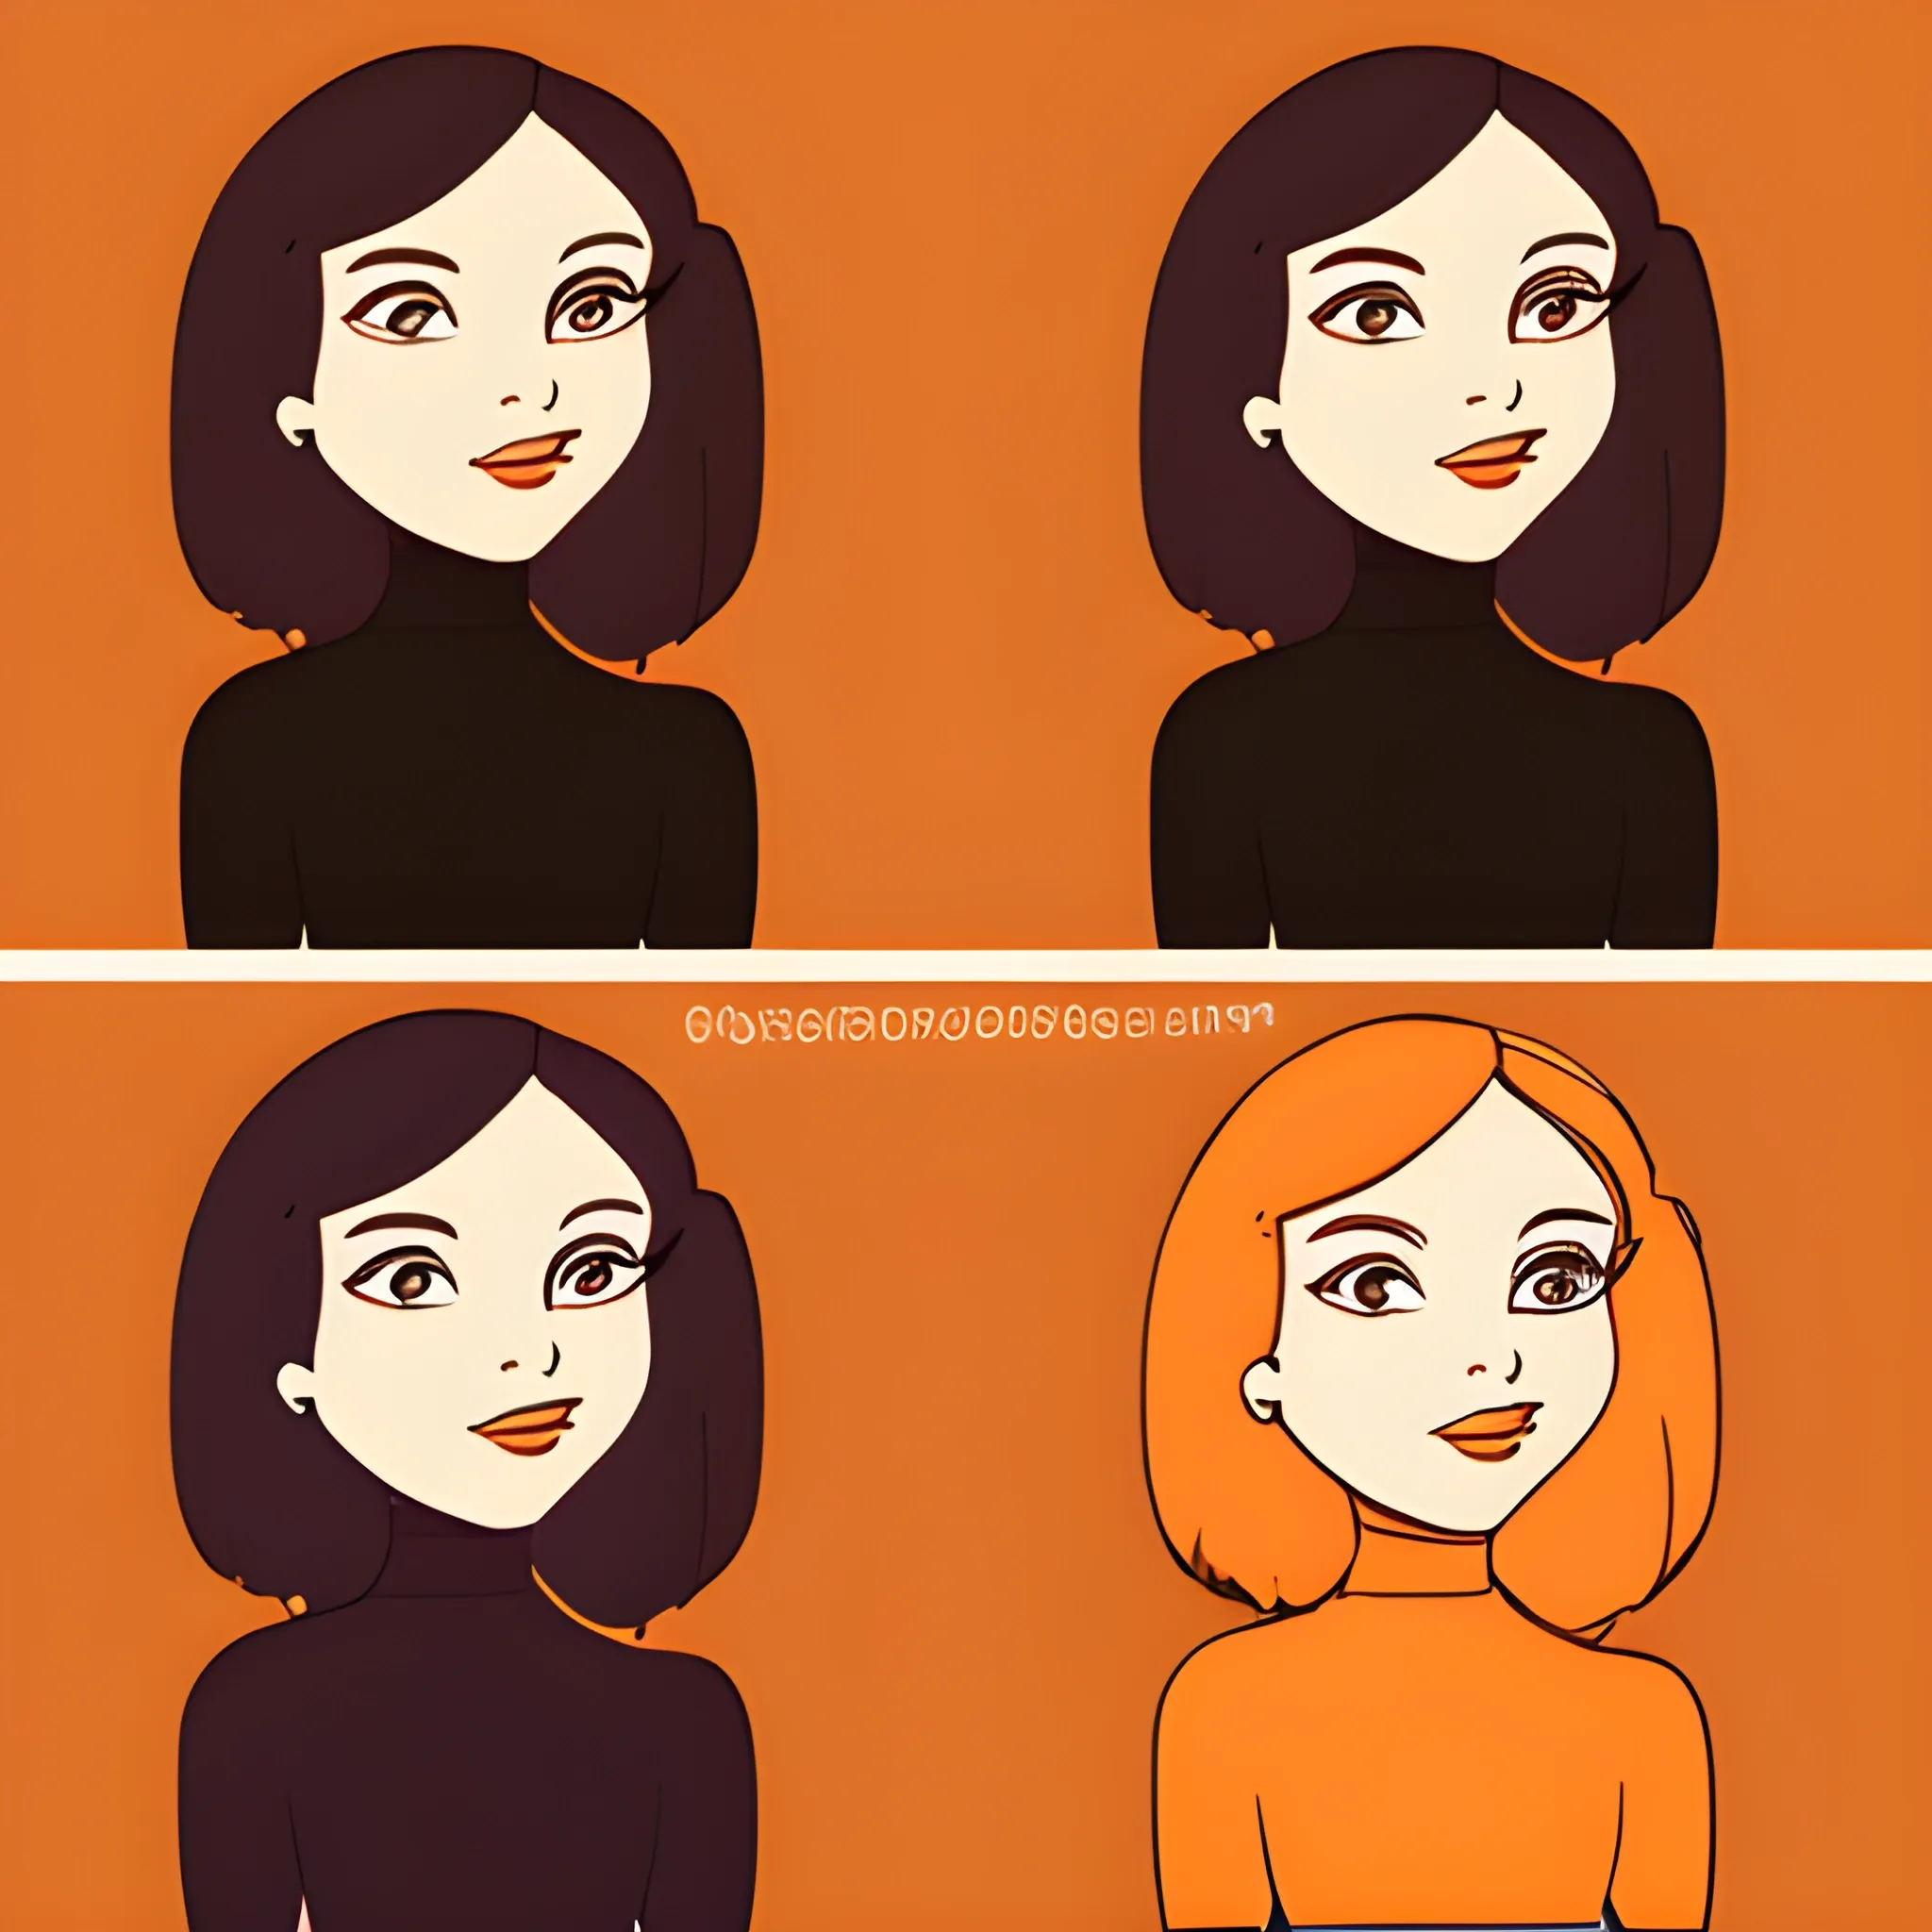 Width 700px, height 250px, the left is the text "photo", the right is a beautiful woman, cartoon style, the whole picture background is a gradual change of color, the top is dark orange, the bottom is light orange, the color transition is uniform